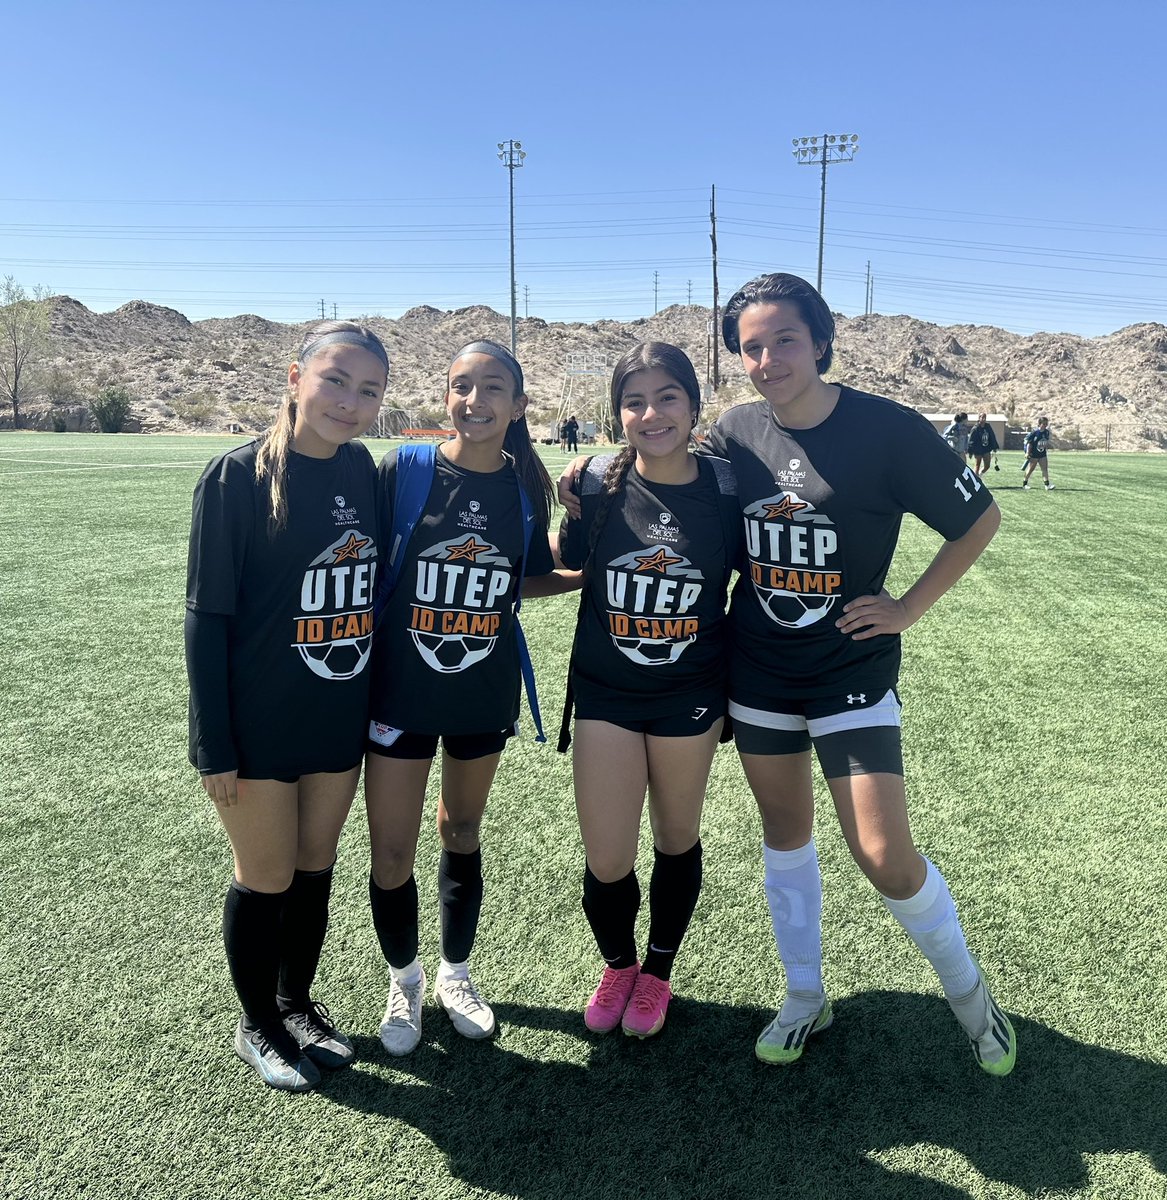 Thank you @UTEPSoccer for a fun, competitive ID Camp! Great learning experience for our HS players! #picksup #vamosfoxes